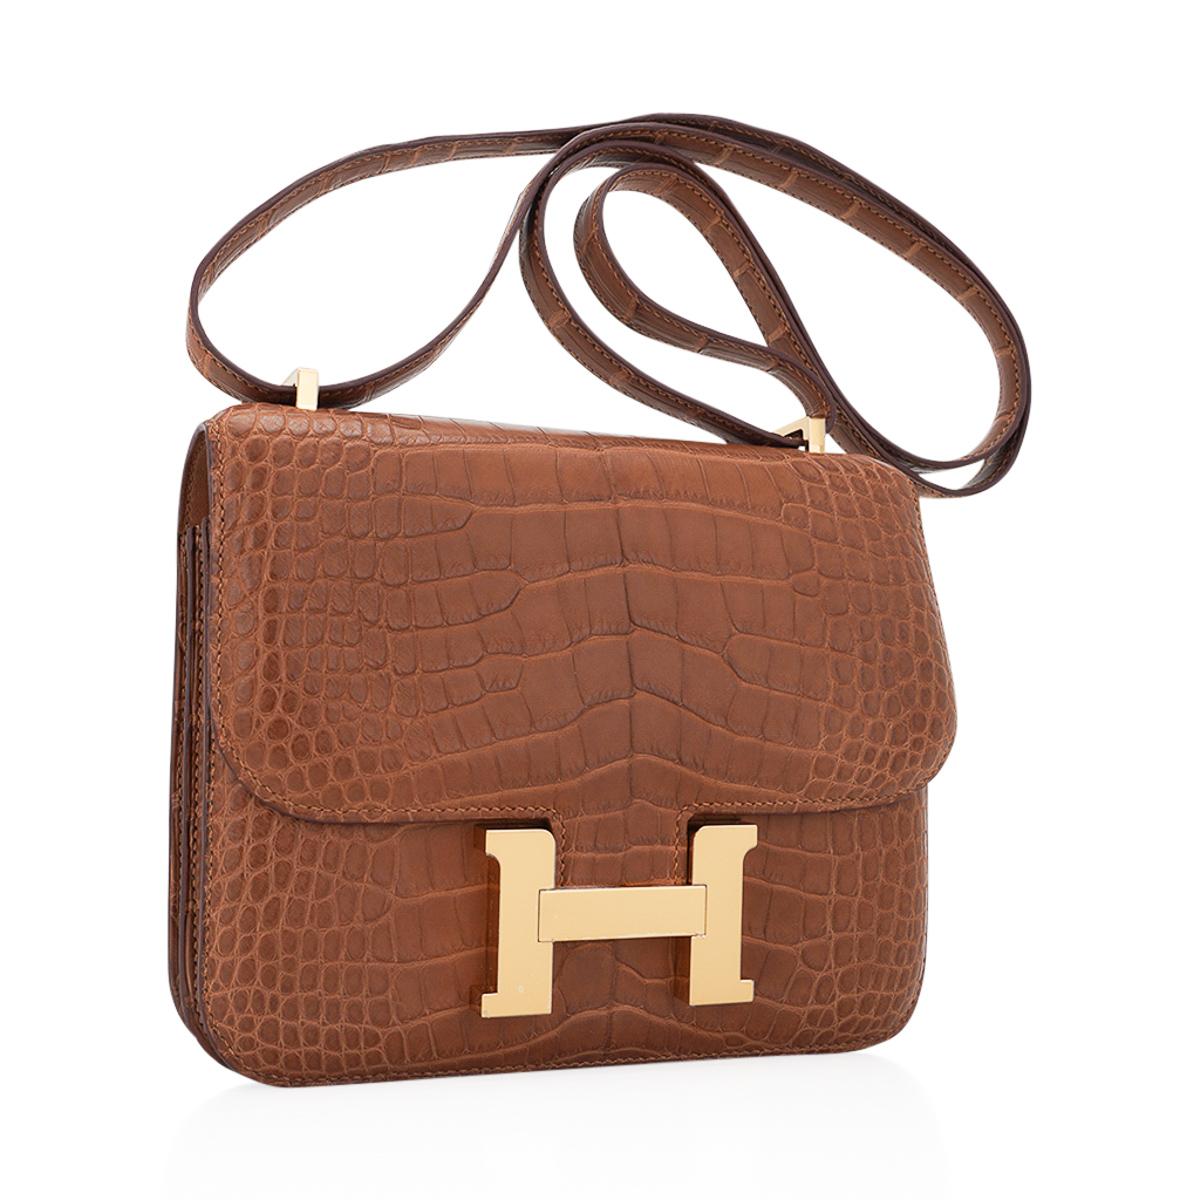 Mightychic offers an Hermes Constance 18 bag featured in Gold Matte Alligator.
Removeable mirror with alligator tab. 
Rich with Gold hardware.
The effect is understated chic.
Hermes Paris Made in France is stamped on front under flap.
Comes with